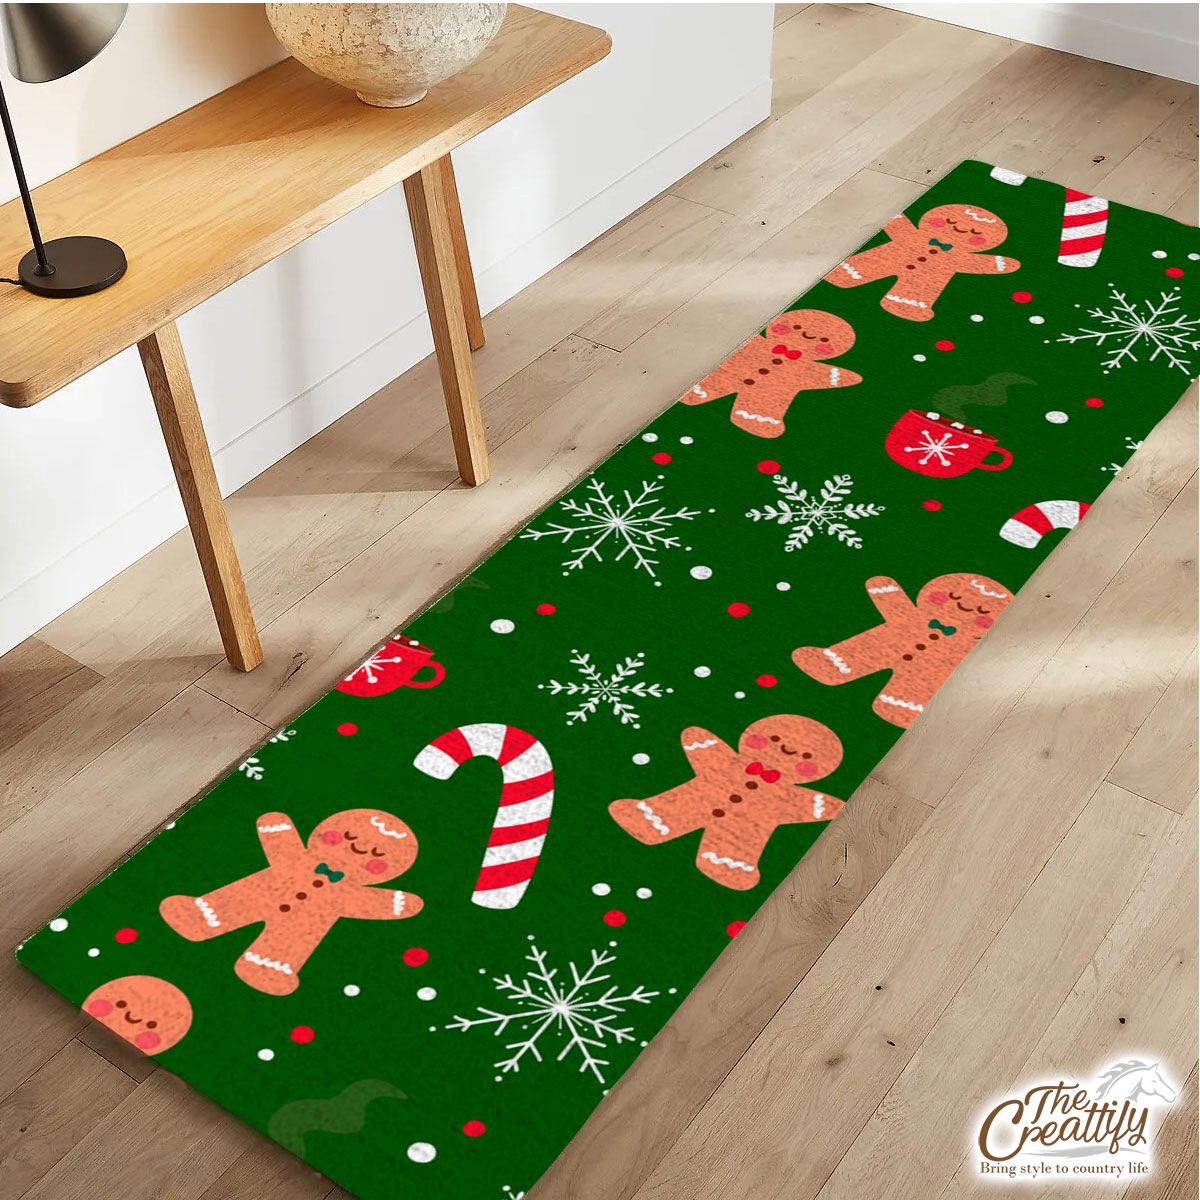 Red Green And White Gingerbread Man, Candy Cane With Snowflake Runner Carpet